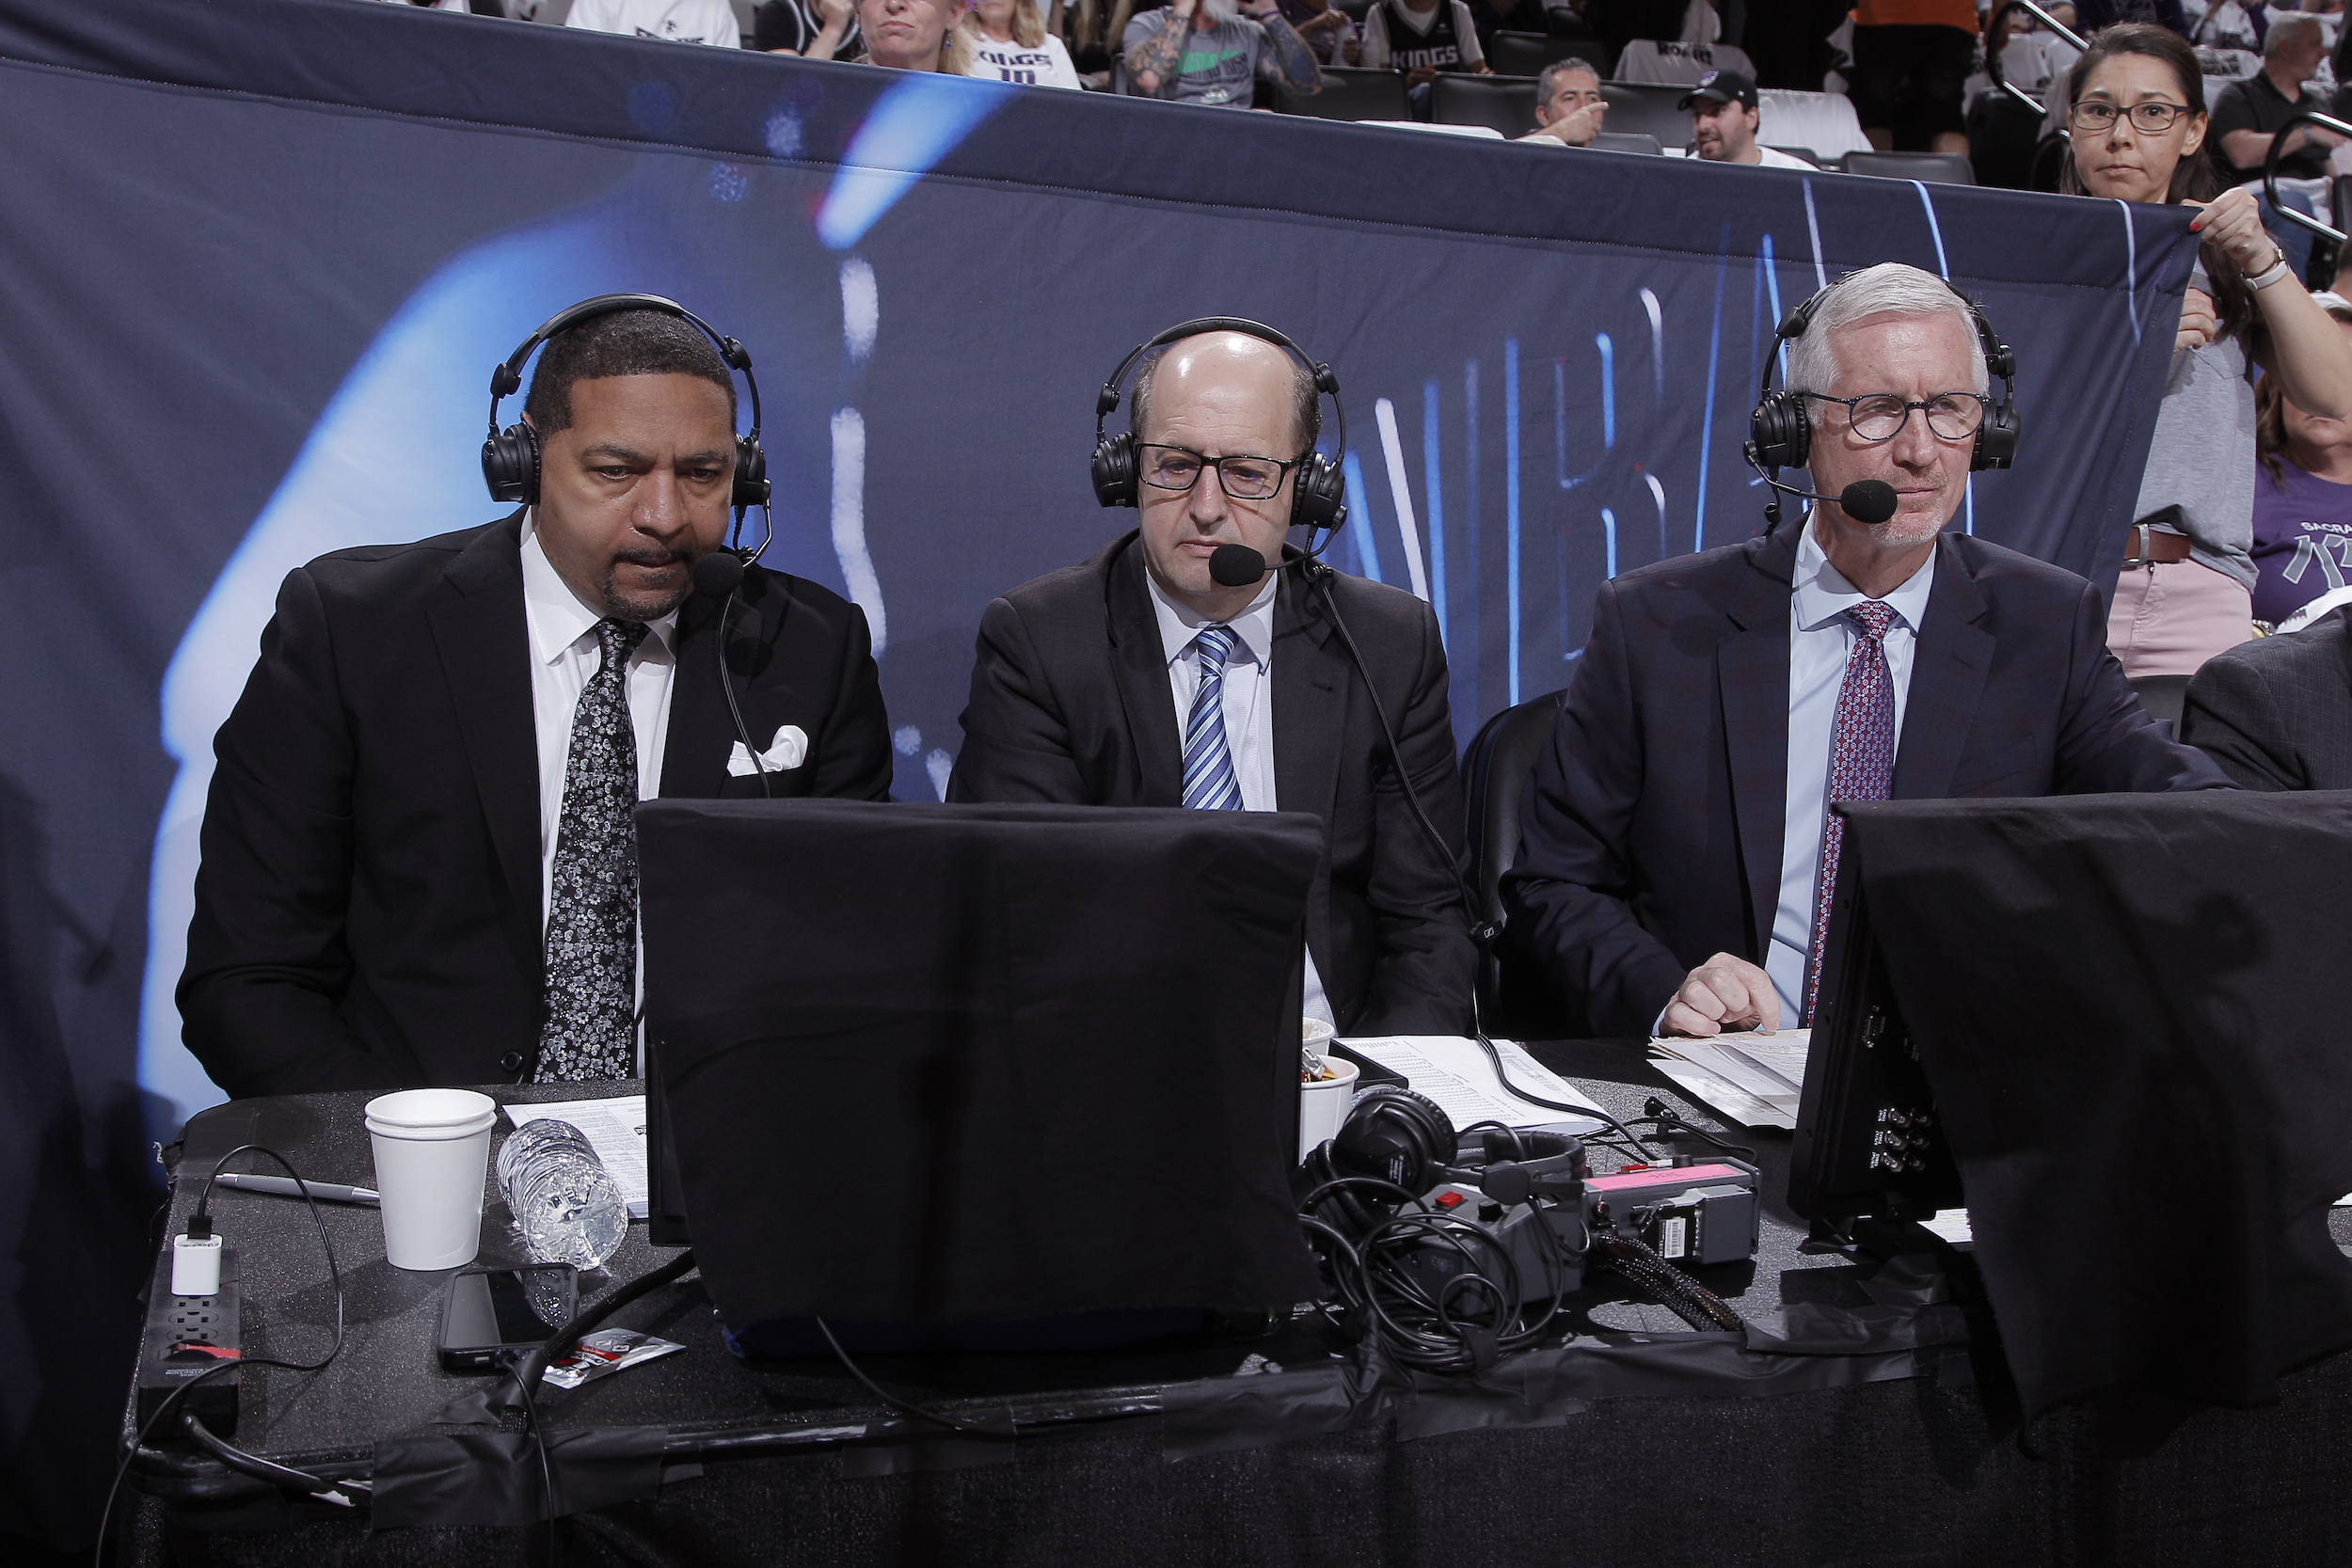 Mark Jackson, Jeff Van Gundy, and Mike Breen report on a playoff game.